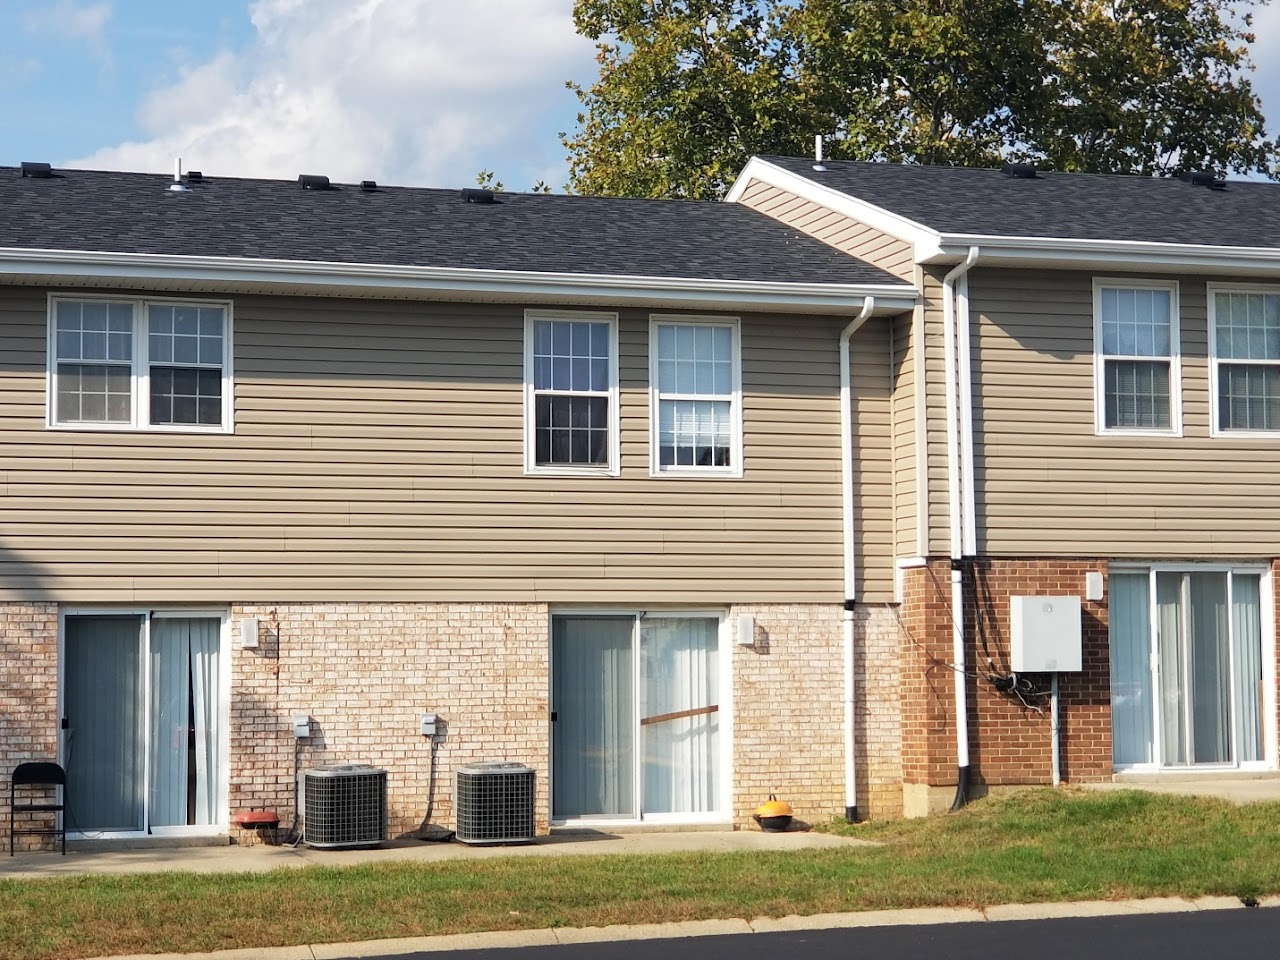 Photo of ALBRIGHT APTS. Affordable housing located at 4936 BIDDISON AVE TROTWOOD, OH 45426